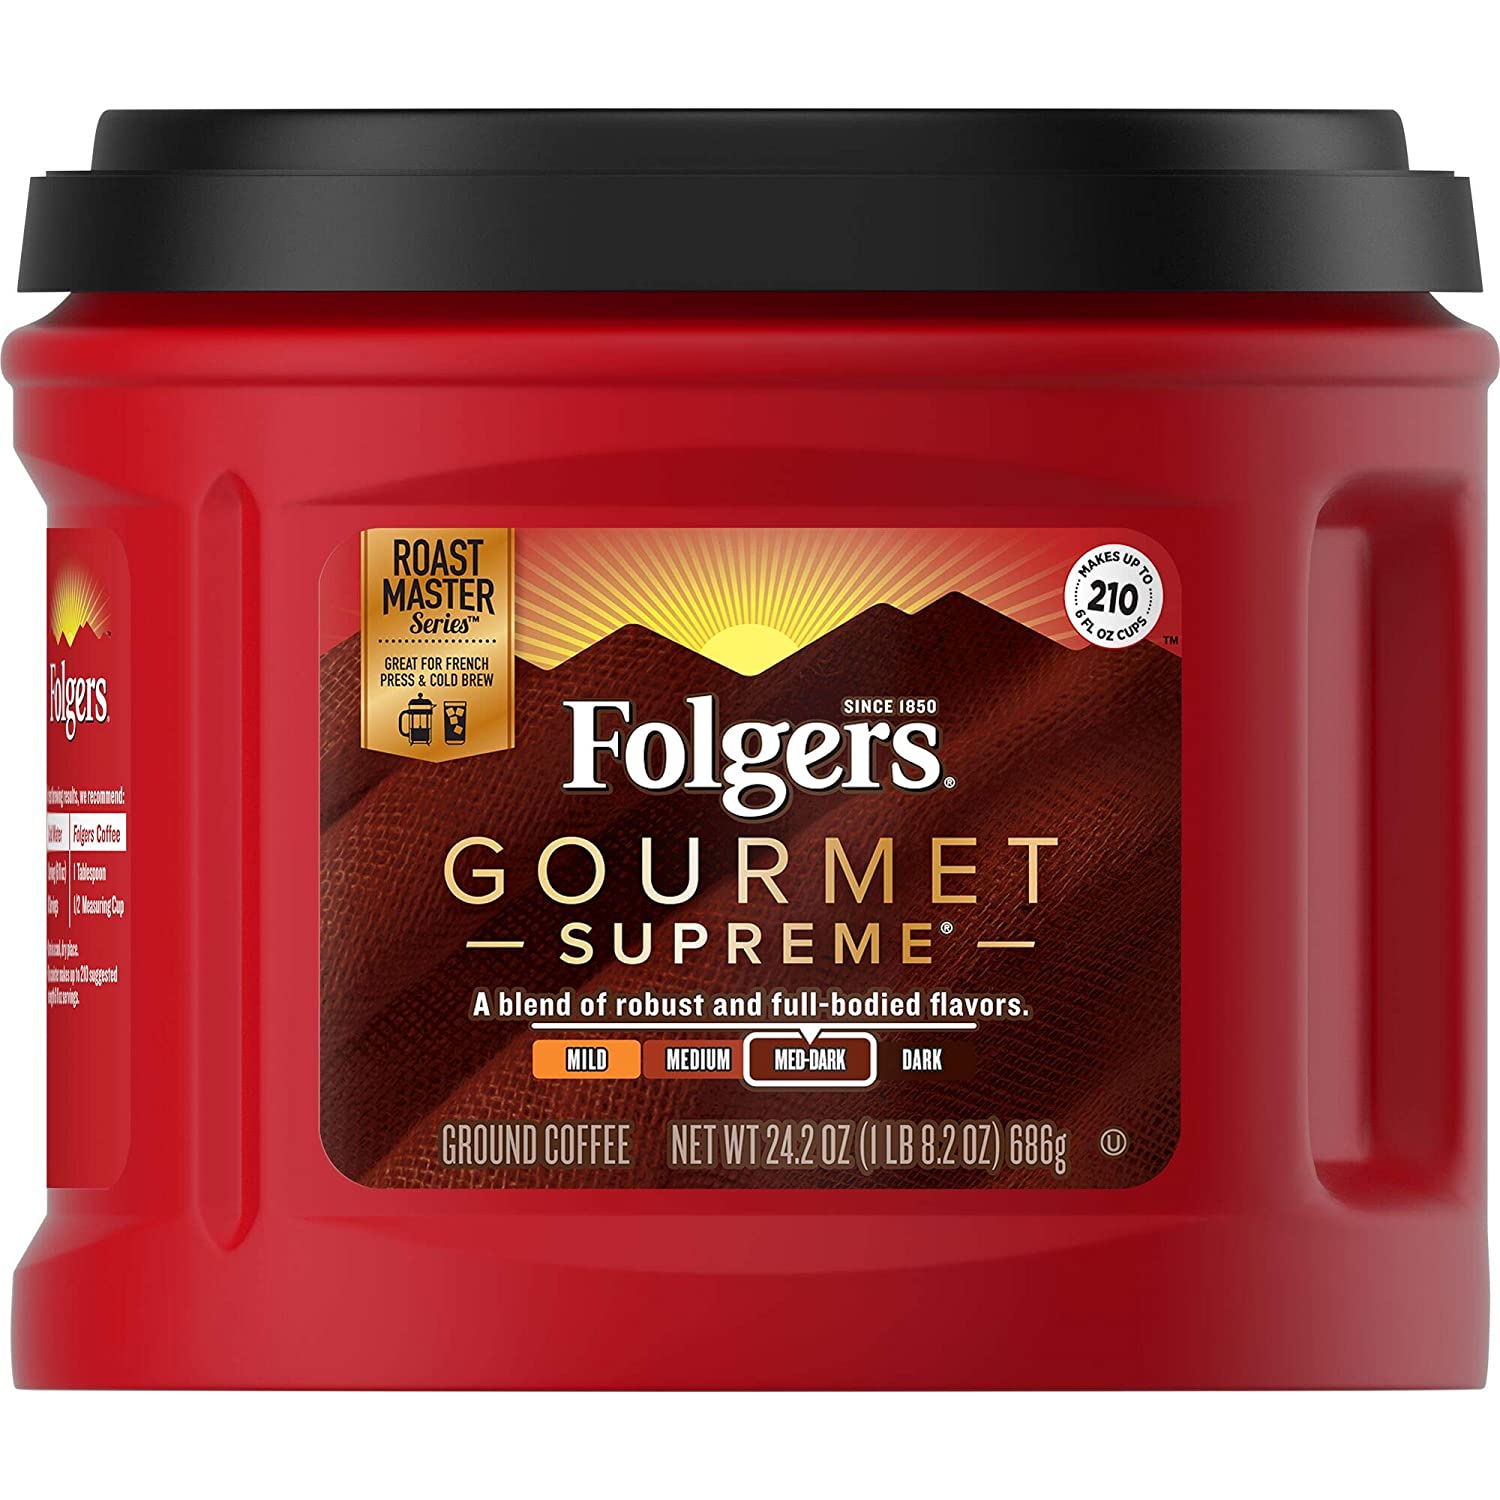 Amazon: Folgers Gourmet Supreme Medium Dark Roast Ground Coffee, 24.2 Ounces - Other Flavors Too: Save 25% off 1st SS AC (Select Accounts) + Free Prime Shipping $4.98